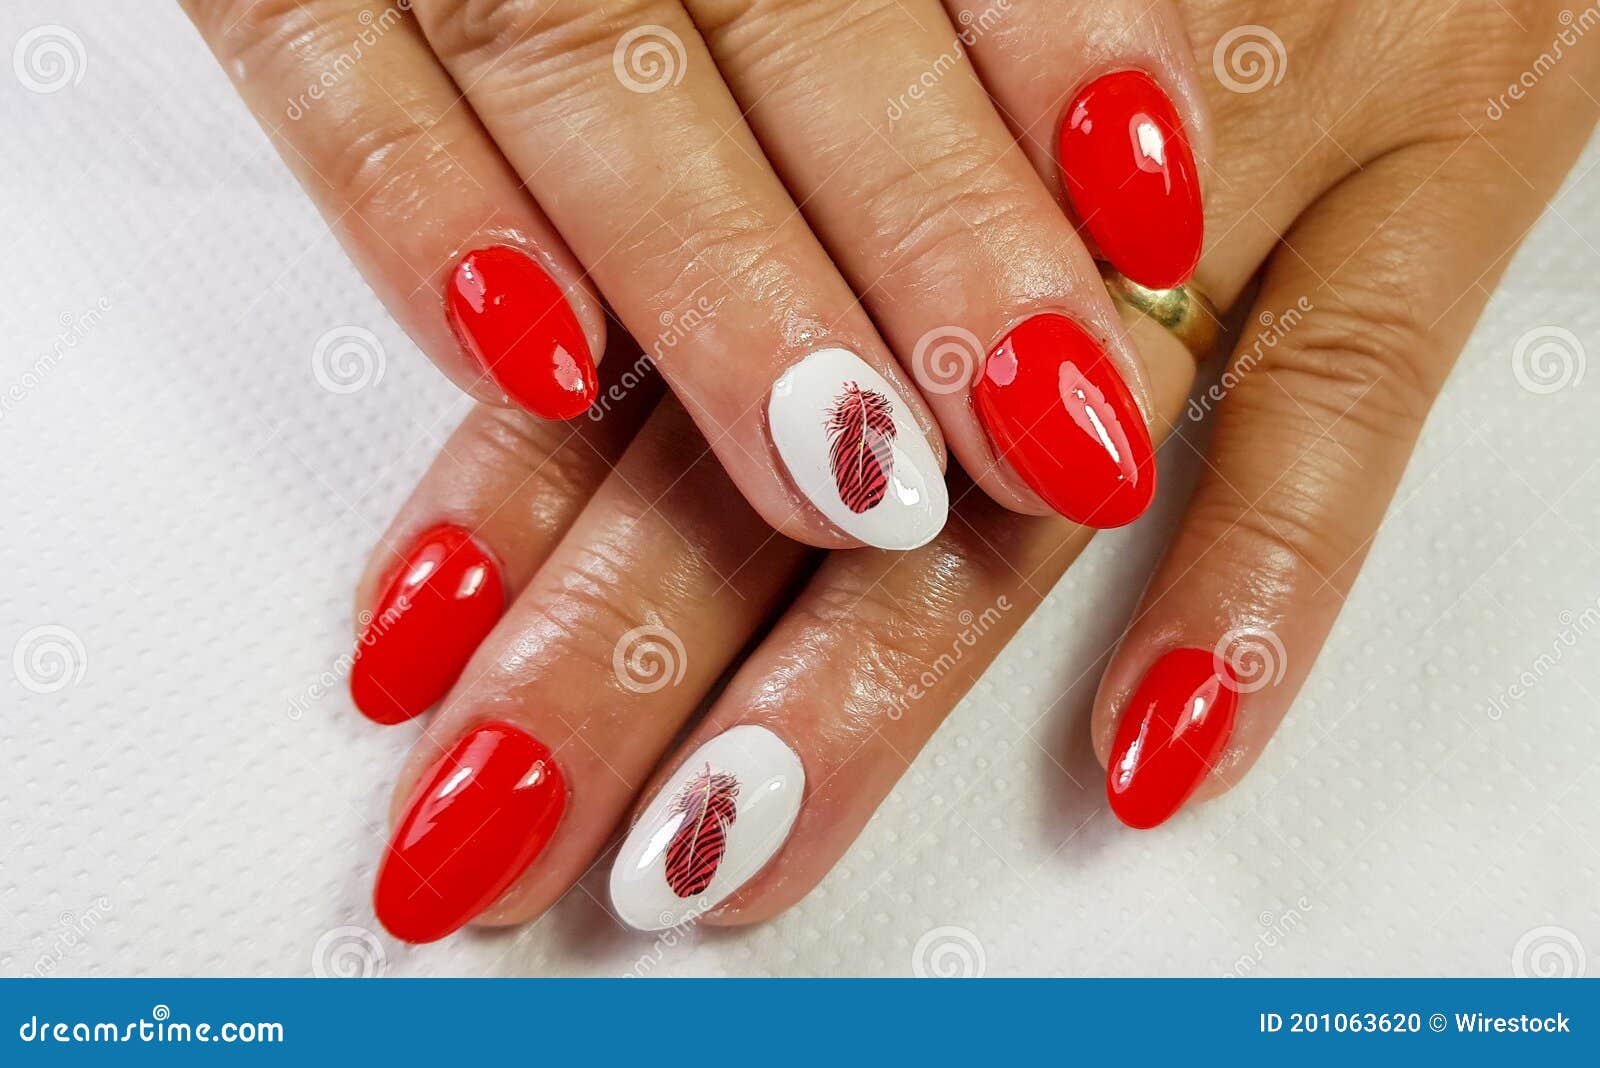 19 Chic Fall Nail Designs for Almond-Shaped Nails in 2023 -  thepinkgoose.com | Fall almond nails, Fall nail designs, Almond shape nails